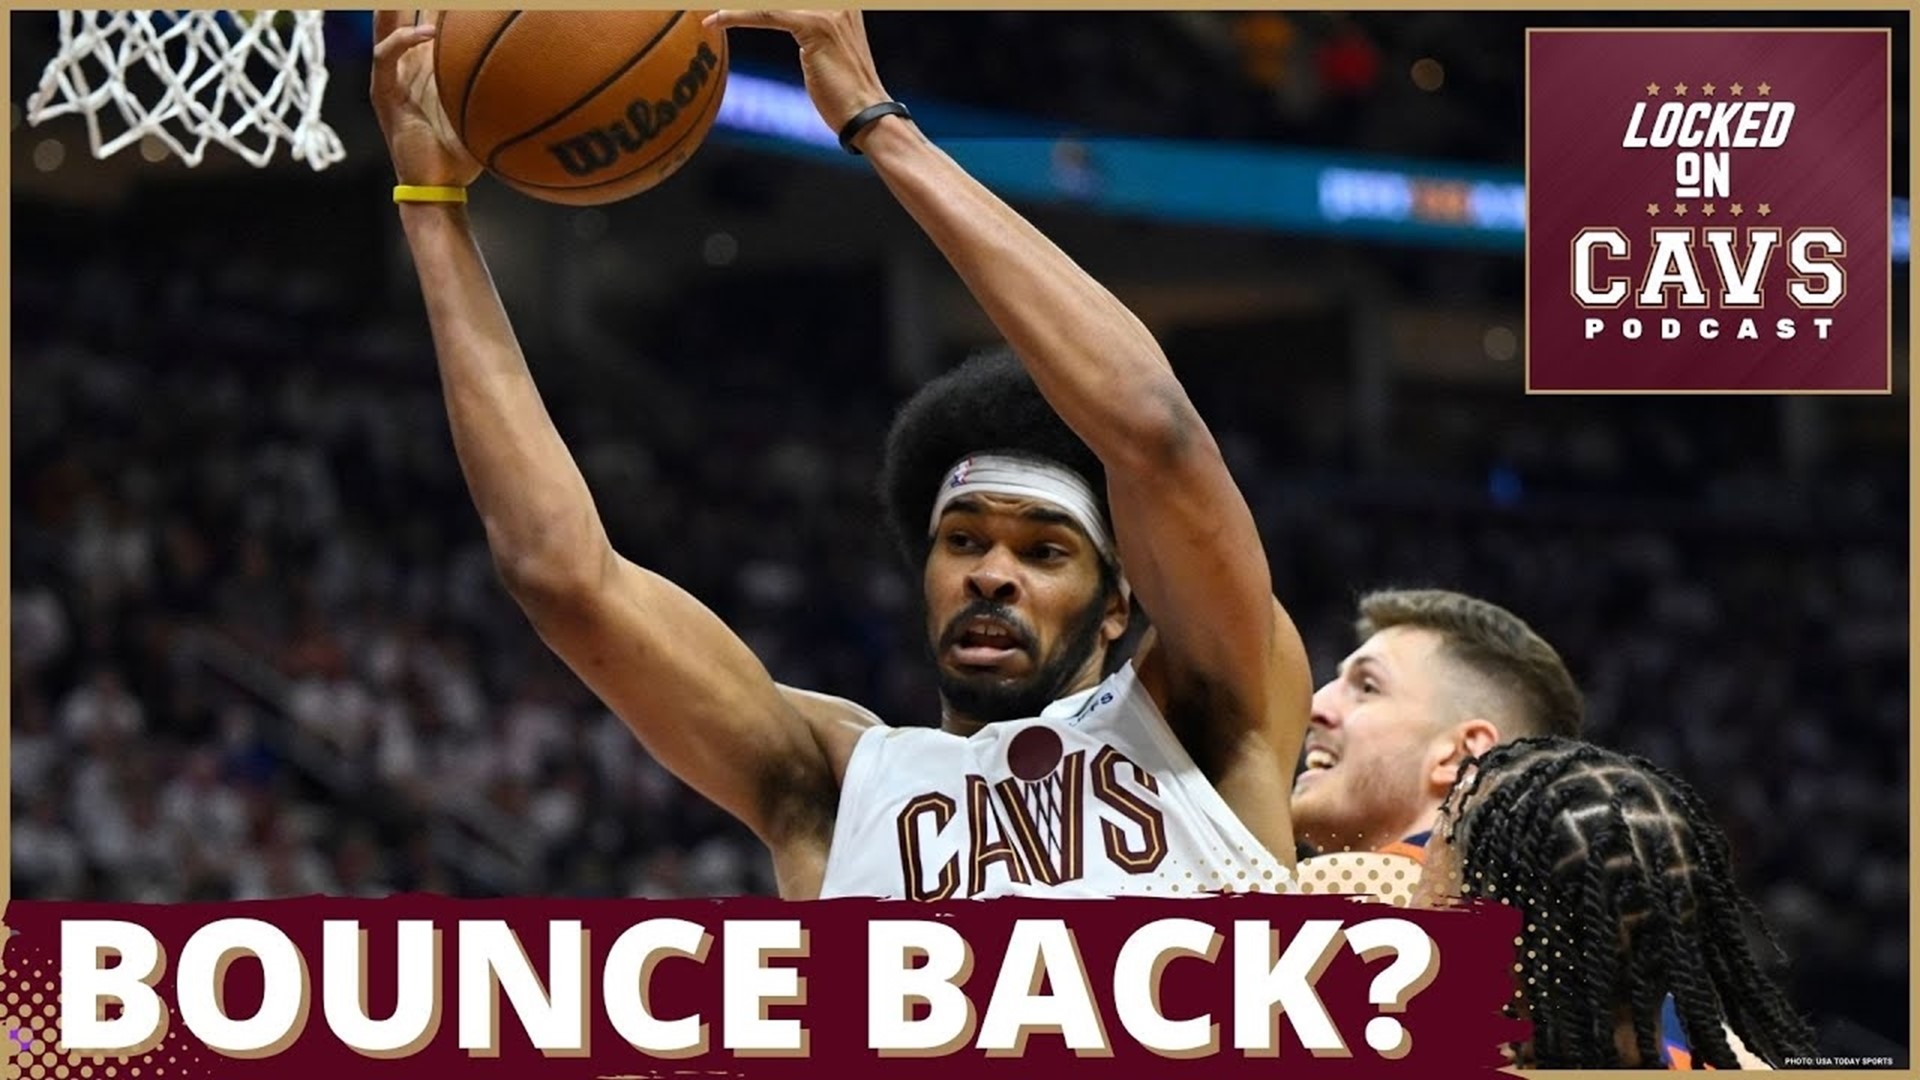 Chris and Evan look at Jarrett Allen and where he needs to get better next season coming off of his disappointing playoff performance